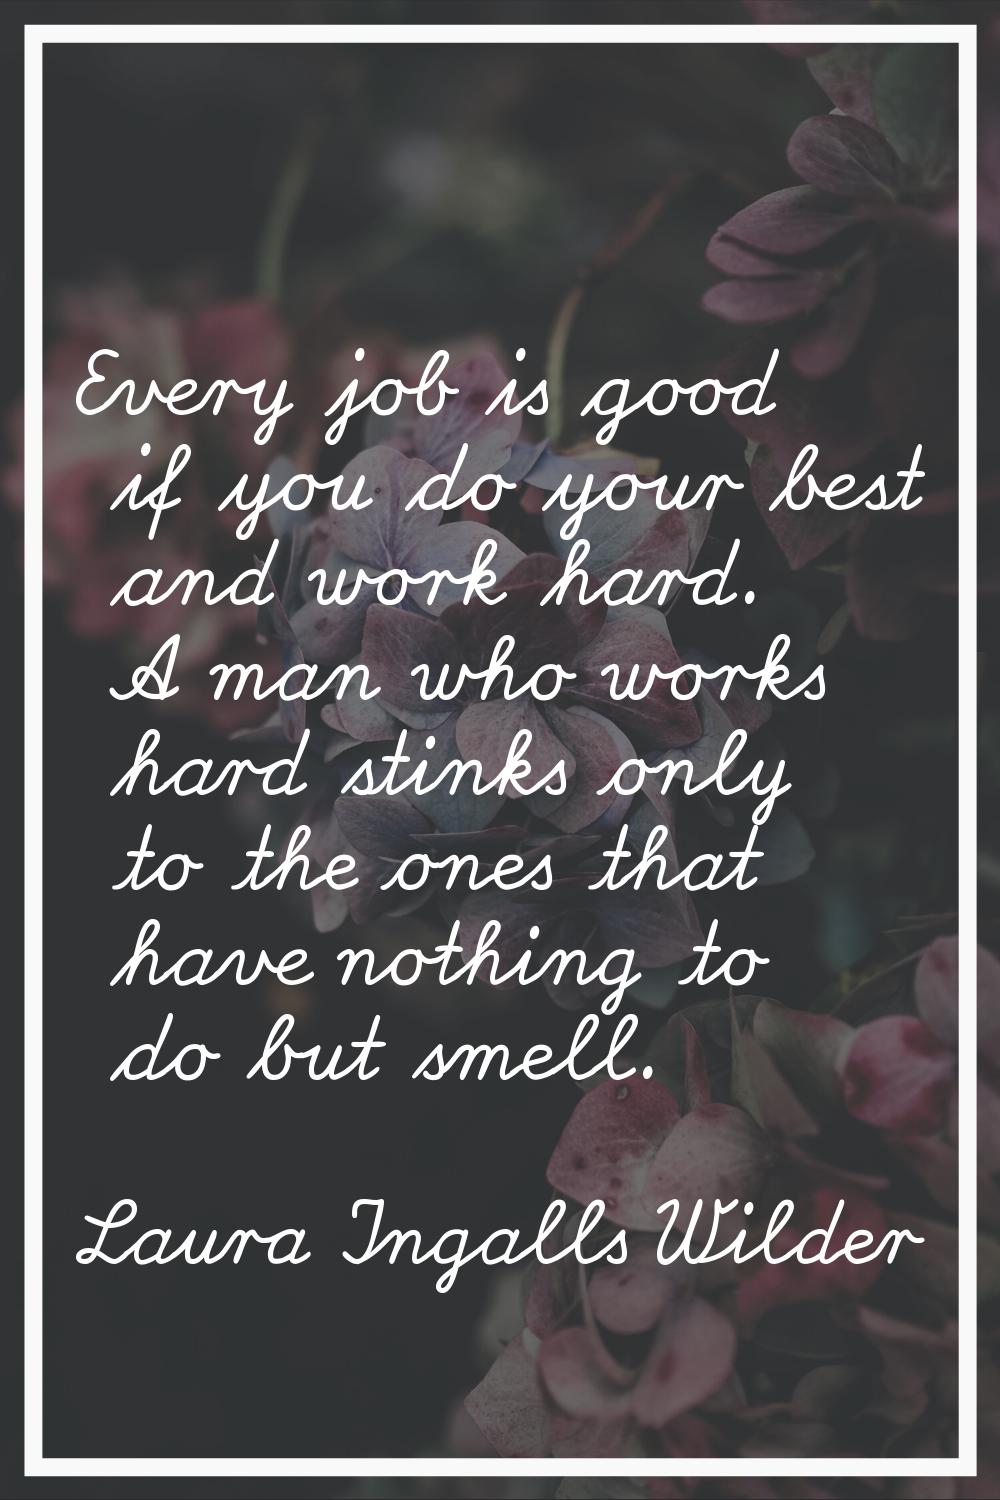 Every job is good if you do your best and work hard. A man who works hard stinks only to the ones t